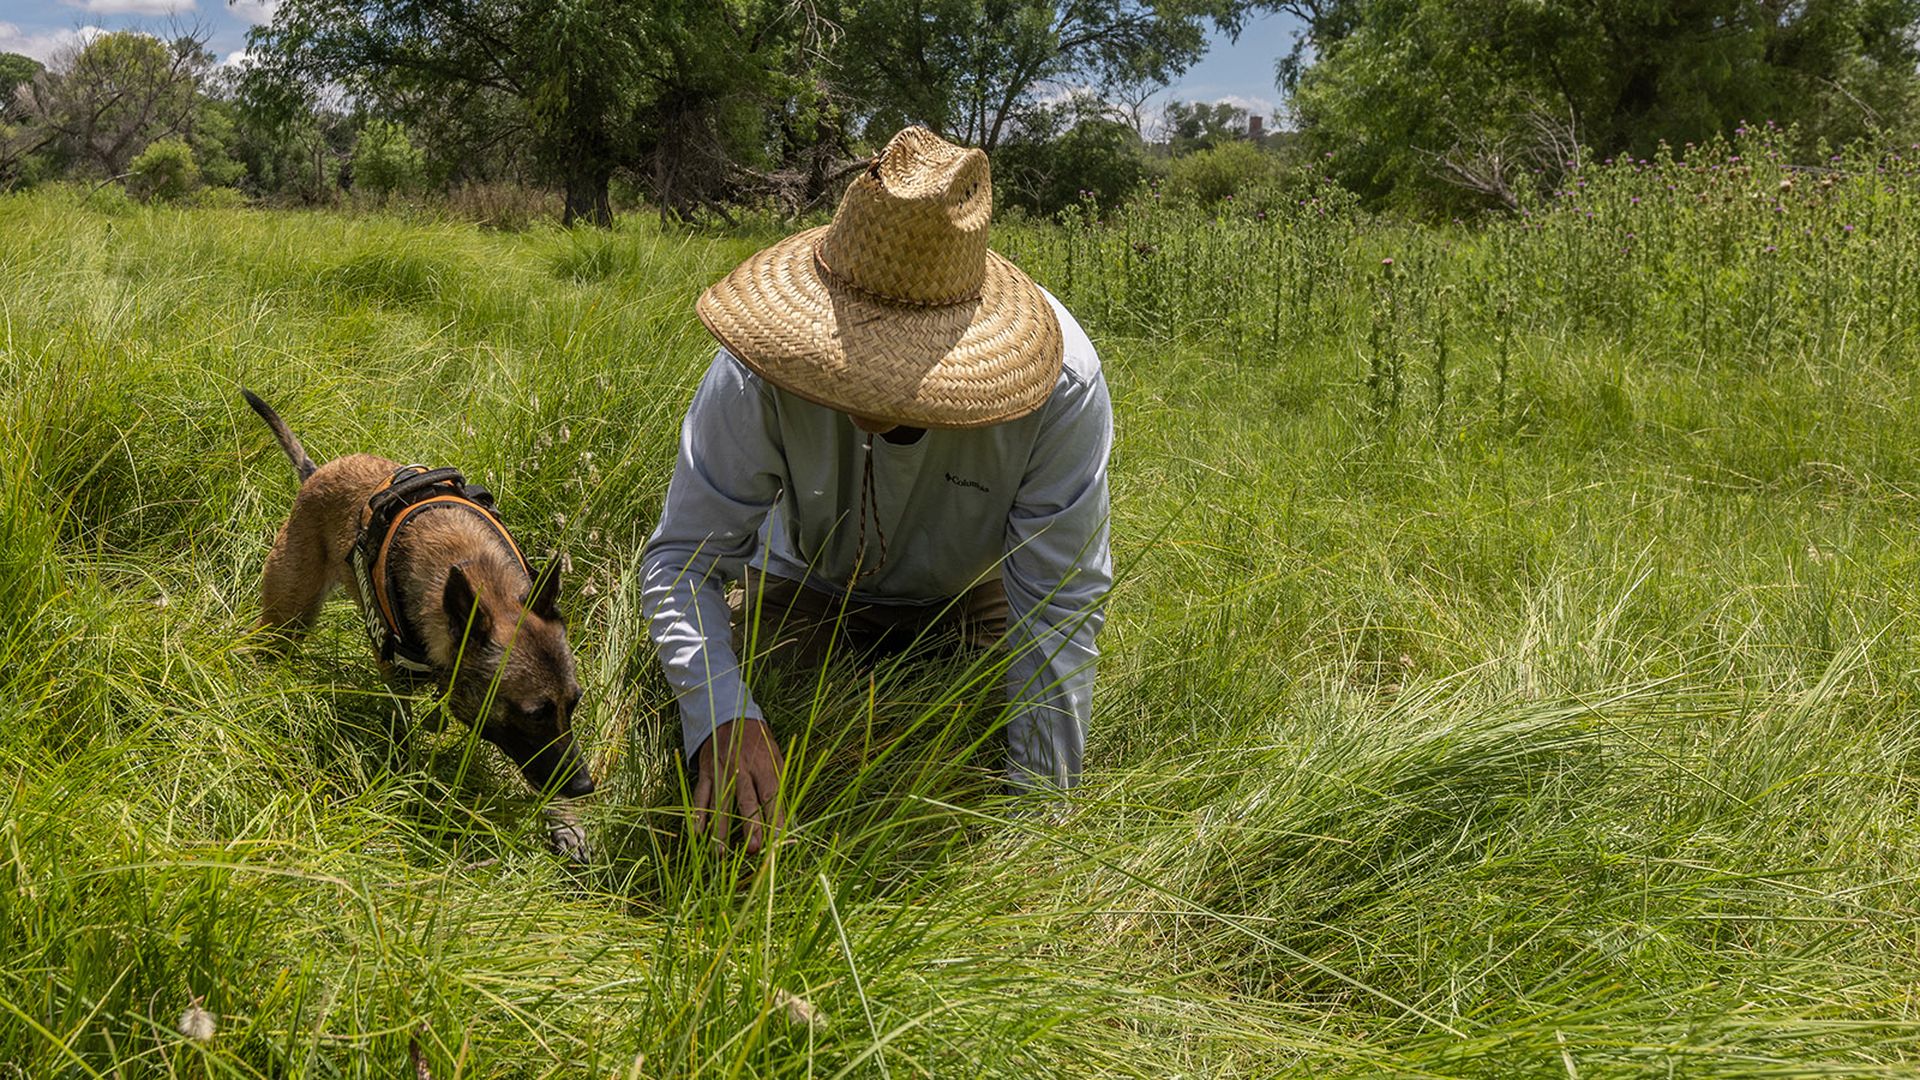 A dog sniffing something next to a man in a field.